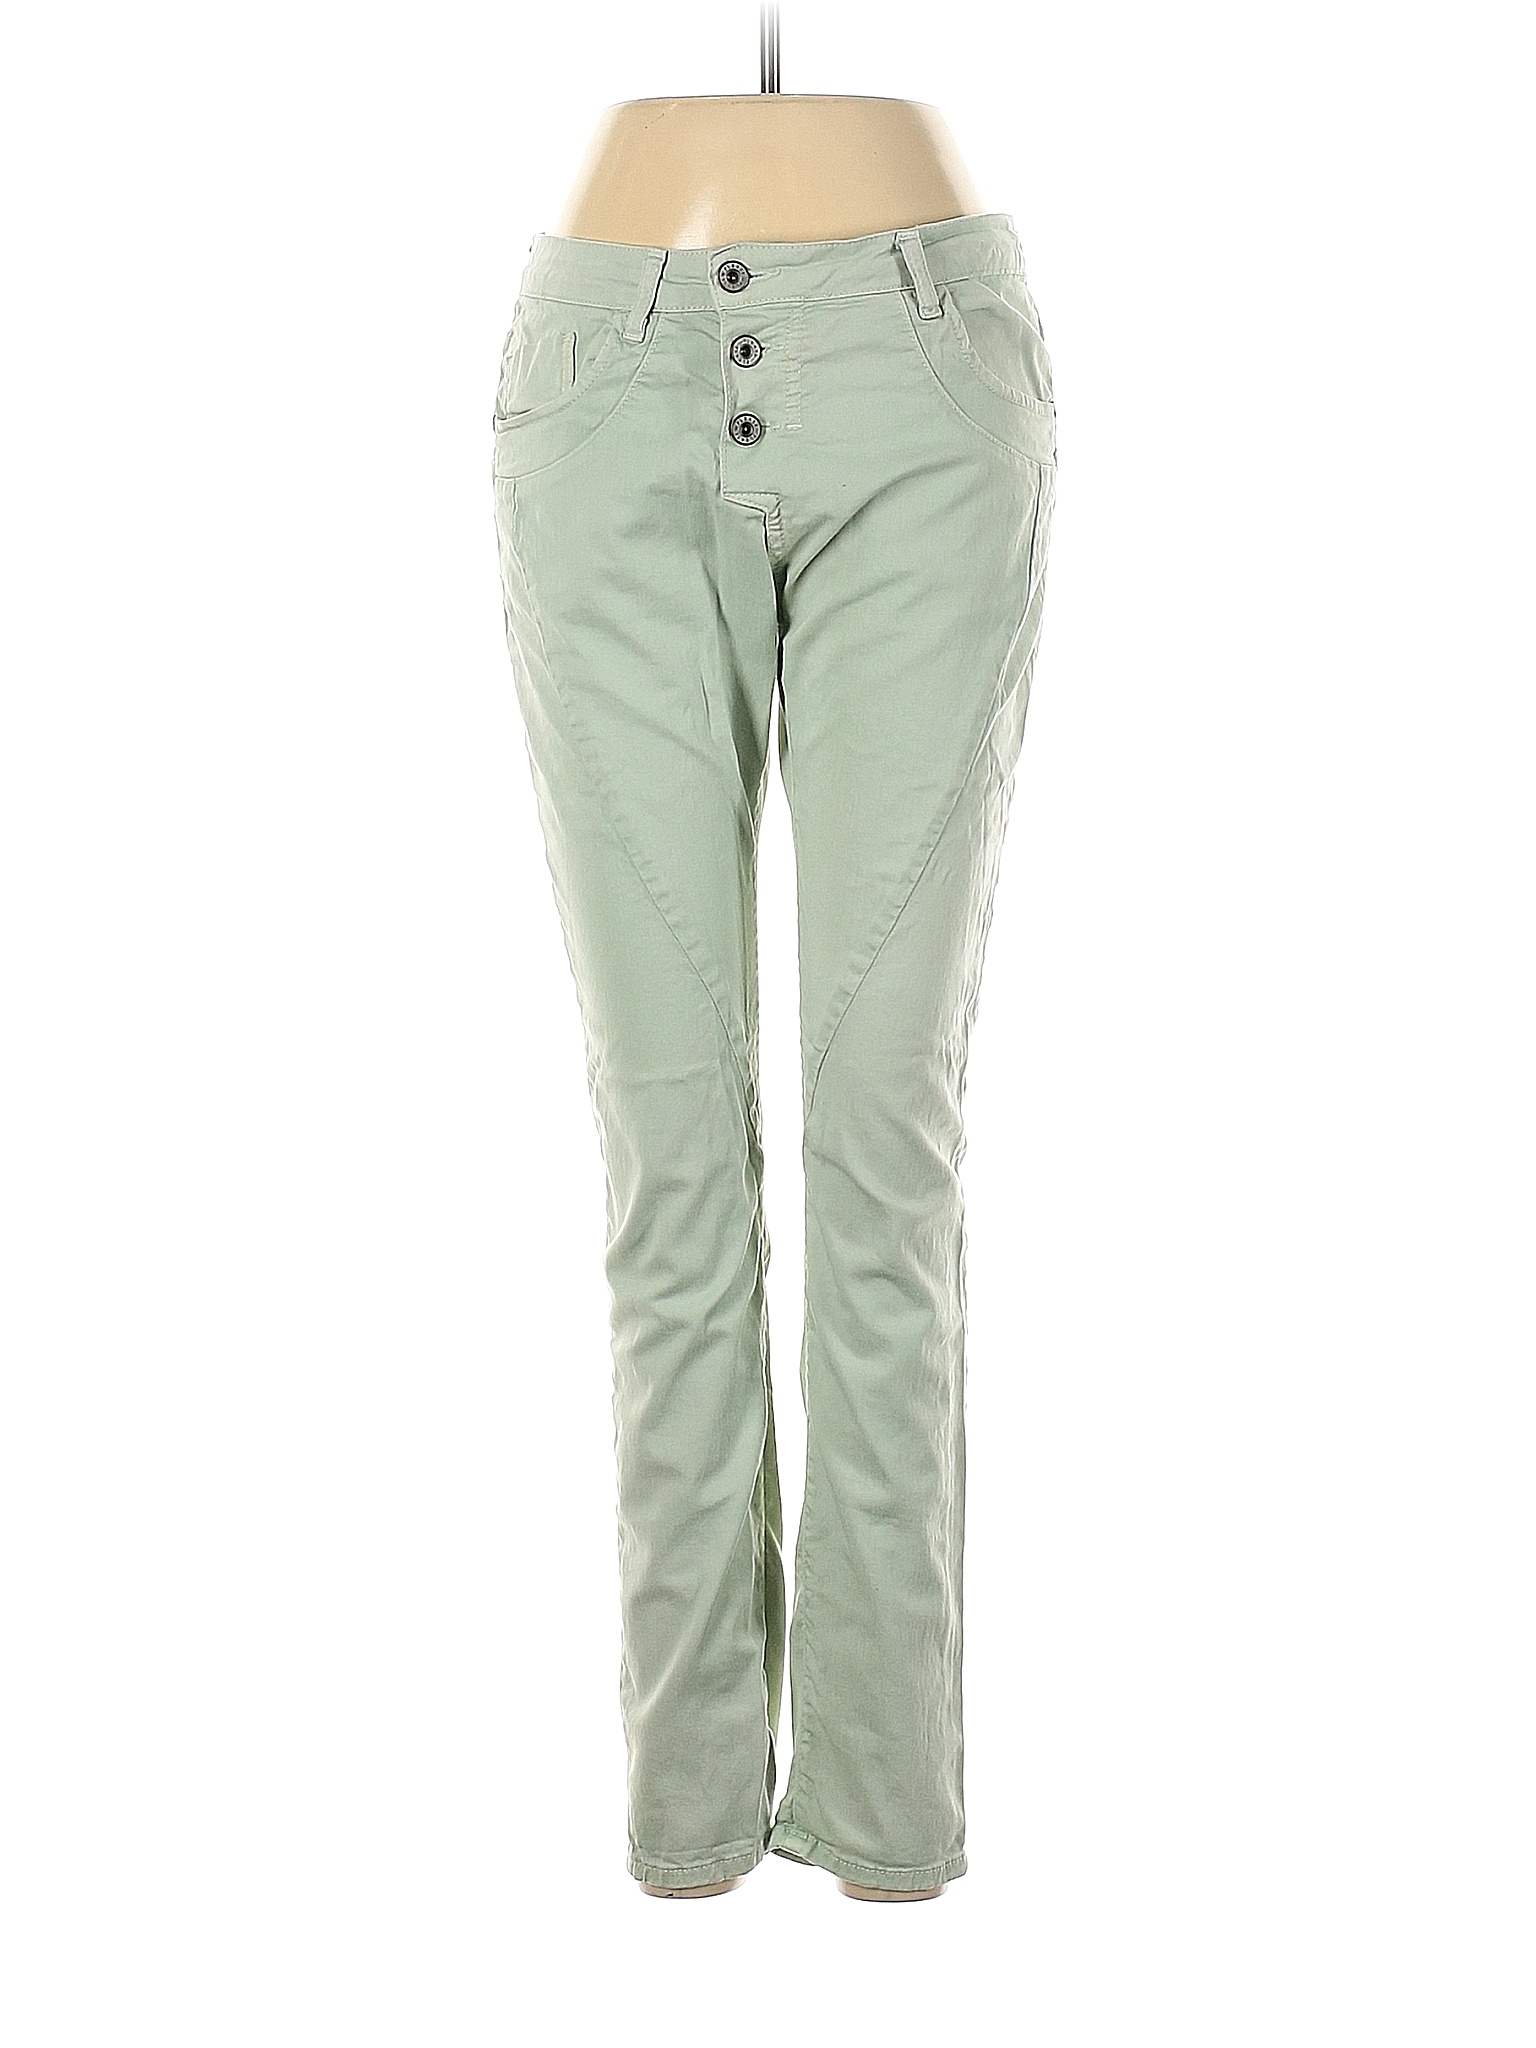 Please Solid Colored Green Jeans Size S - 92% off | thredUP